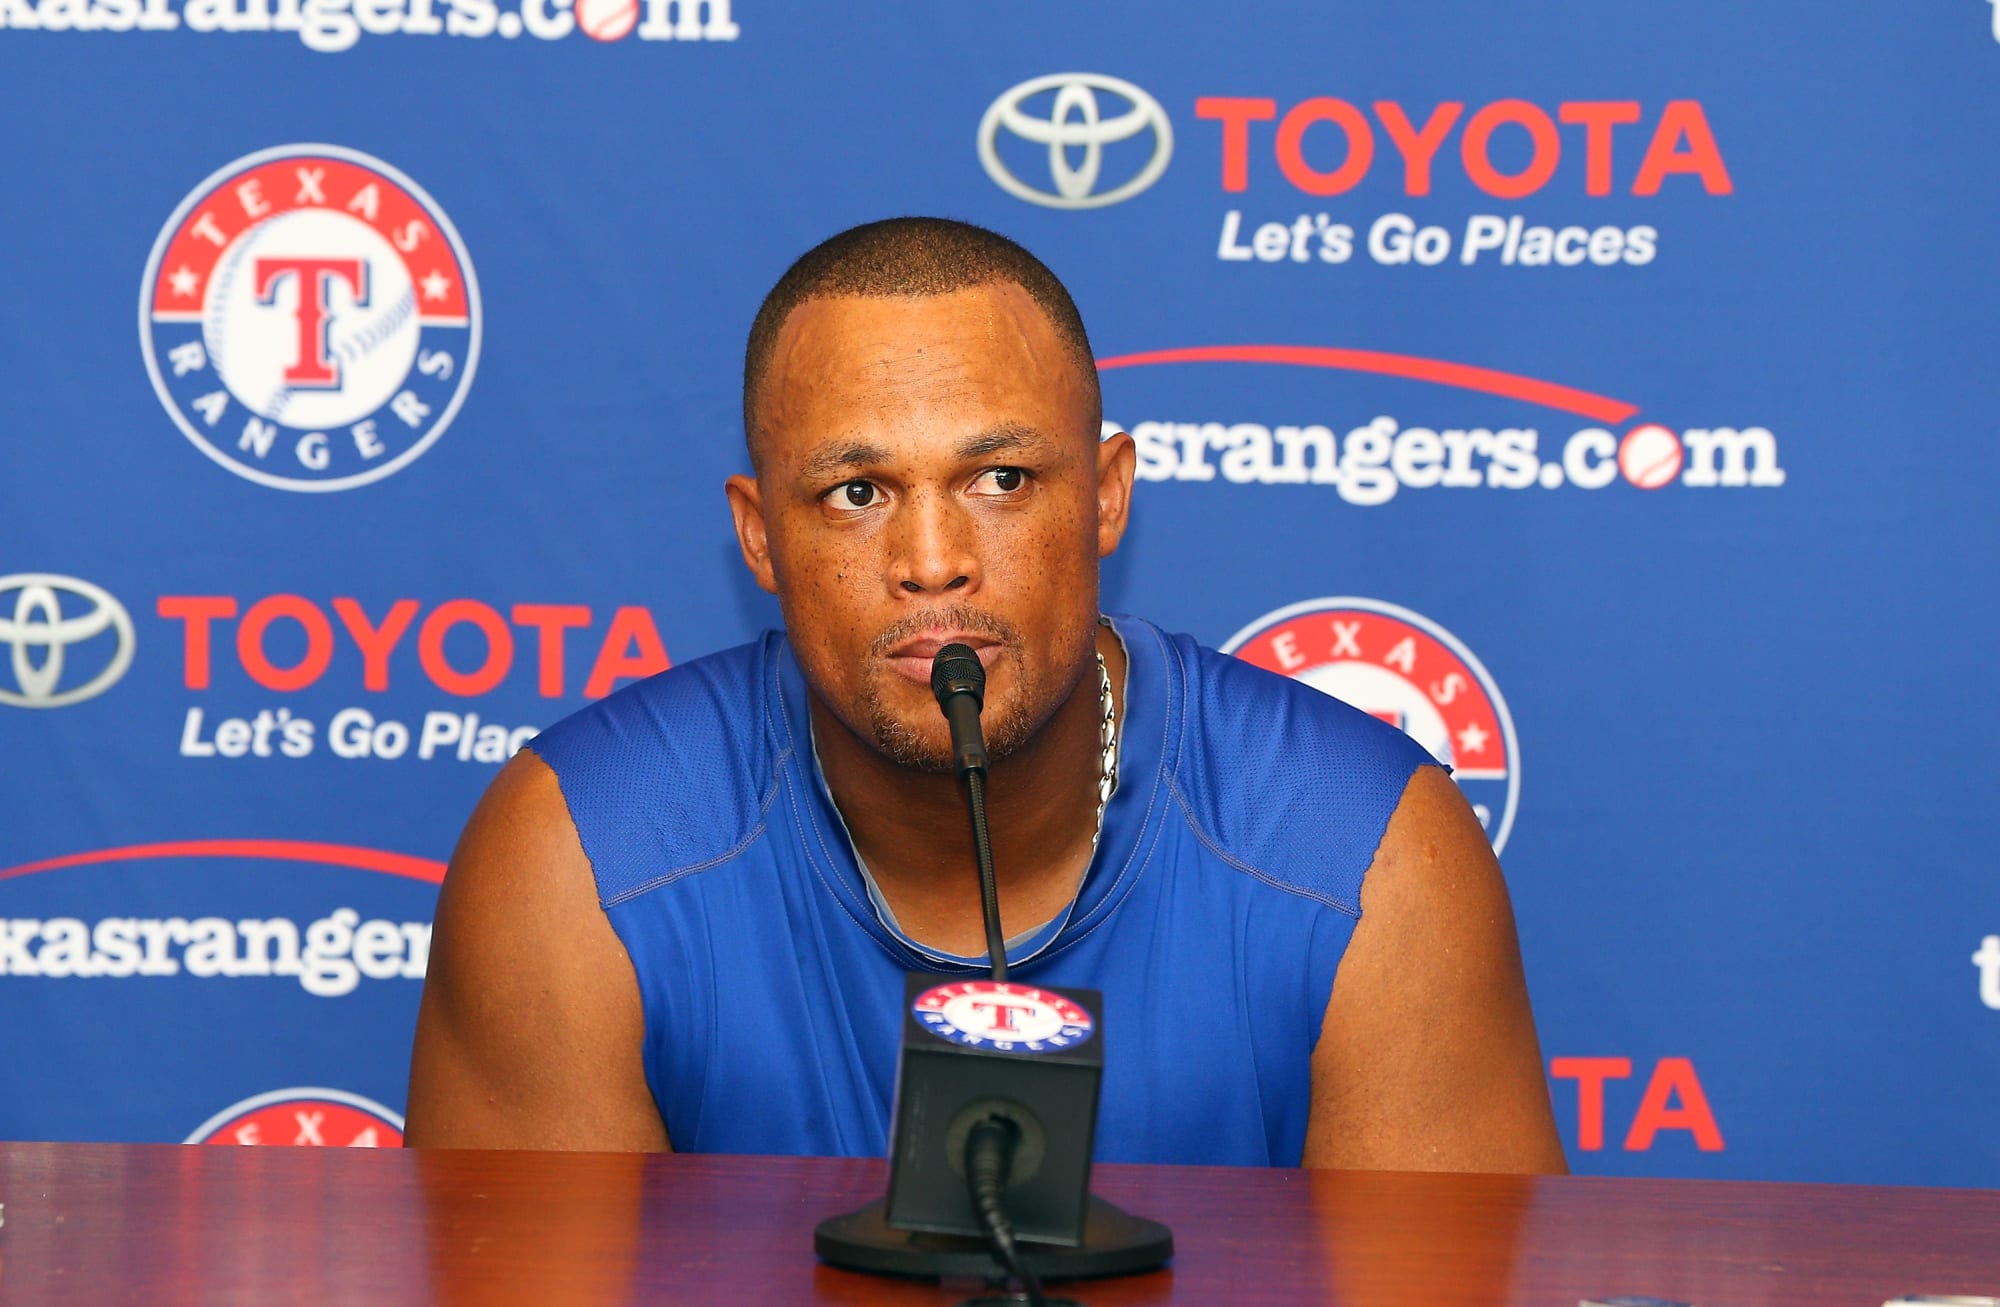 When Adrian Beltre and other players from the Dominican Republic were  accused of steroid use by radio host Doug Gottlieb